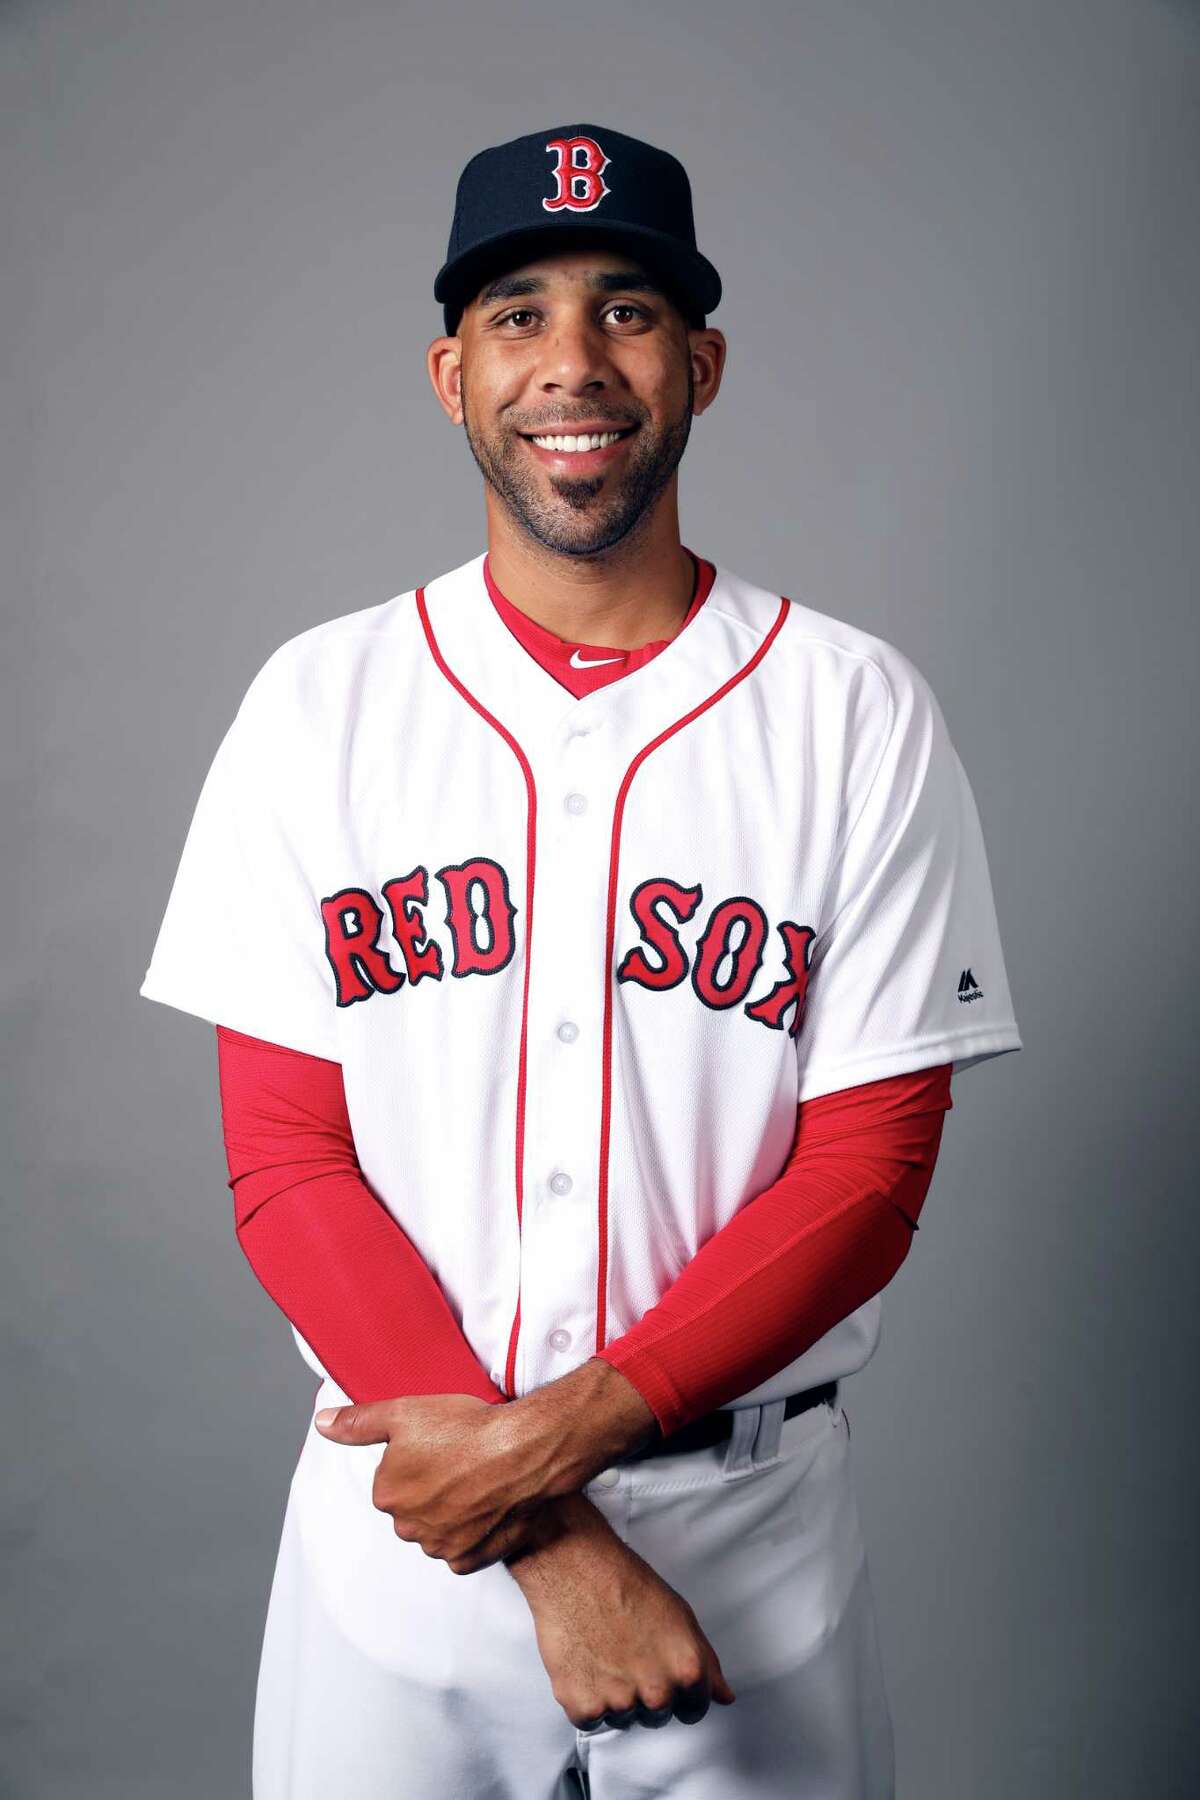 FORT MYERS, FL - FEBRUARY 19: David Price #24 of the Boston Red Sox poses during Photo Day on Sunday, February 19, 2017 at JetBlue Park in Fort Myers, Florida. (Photo by Robbie Rogers/MLB Photos via Getty Images) *** Local Caption *** David Price